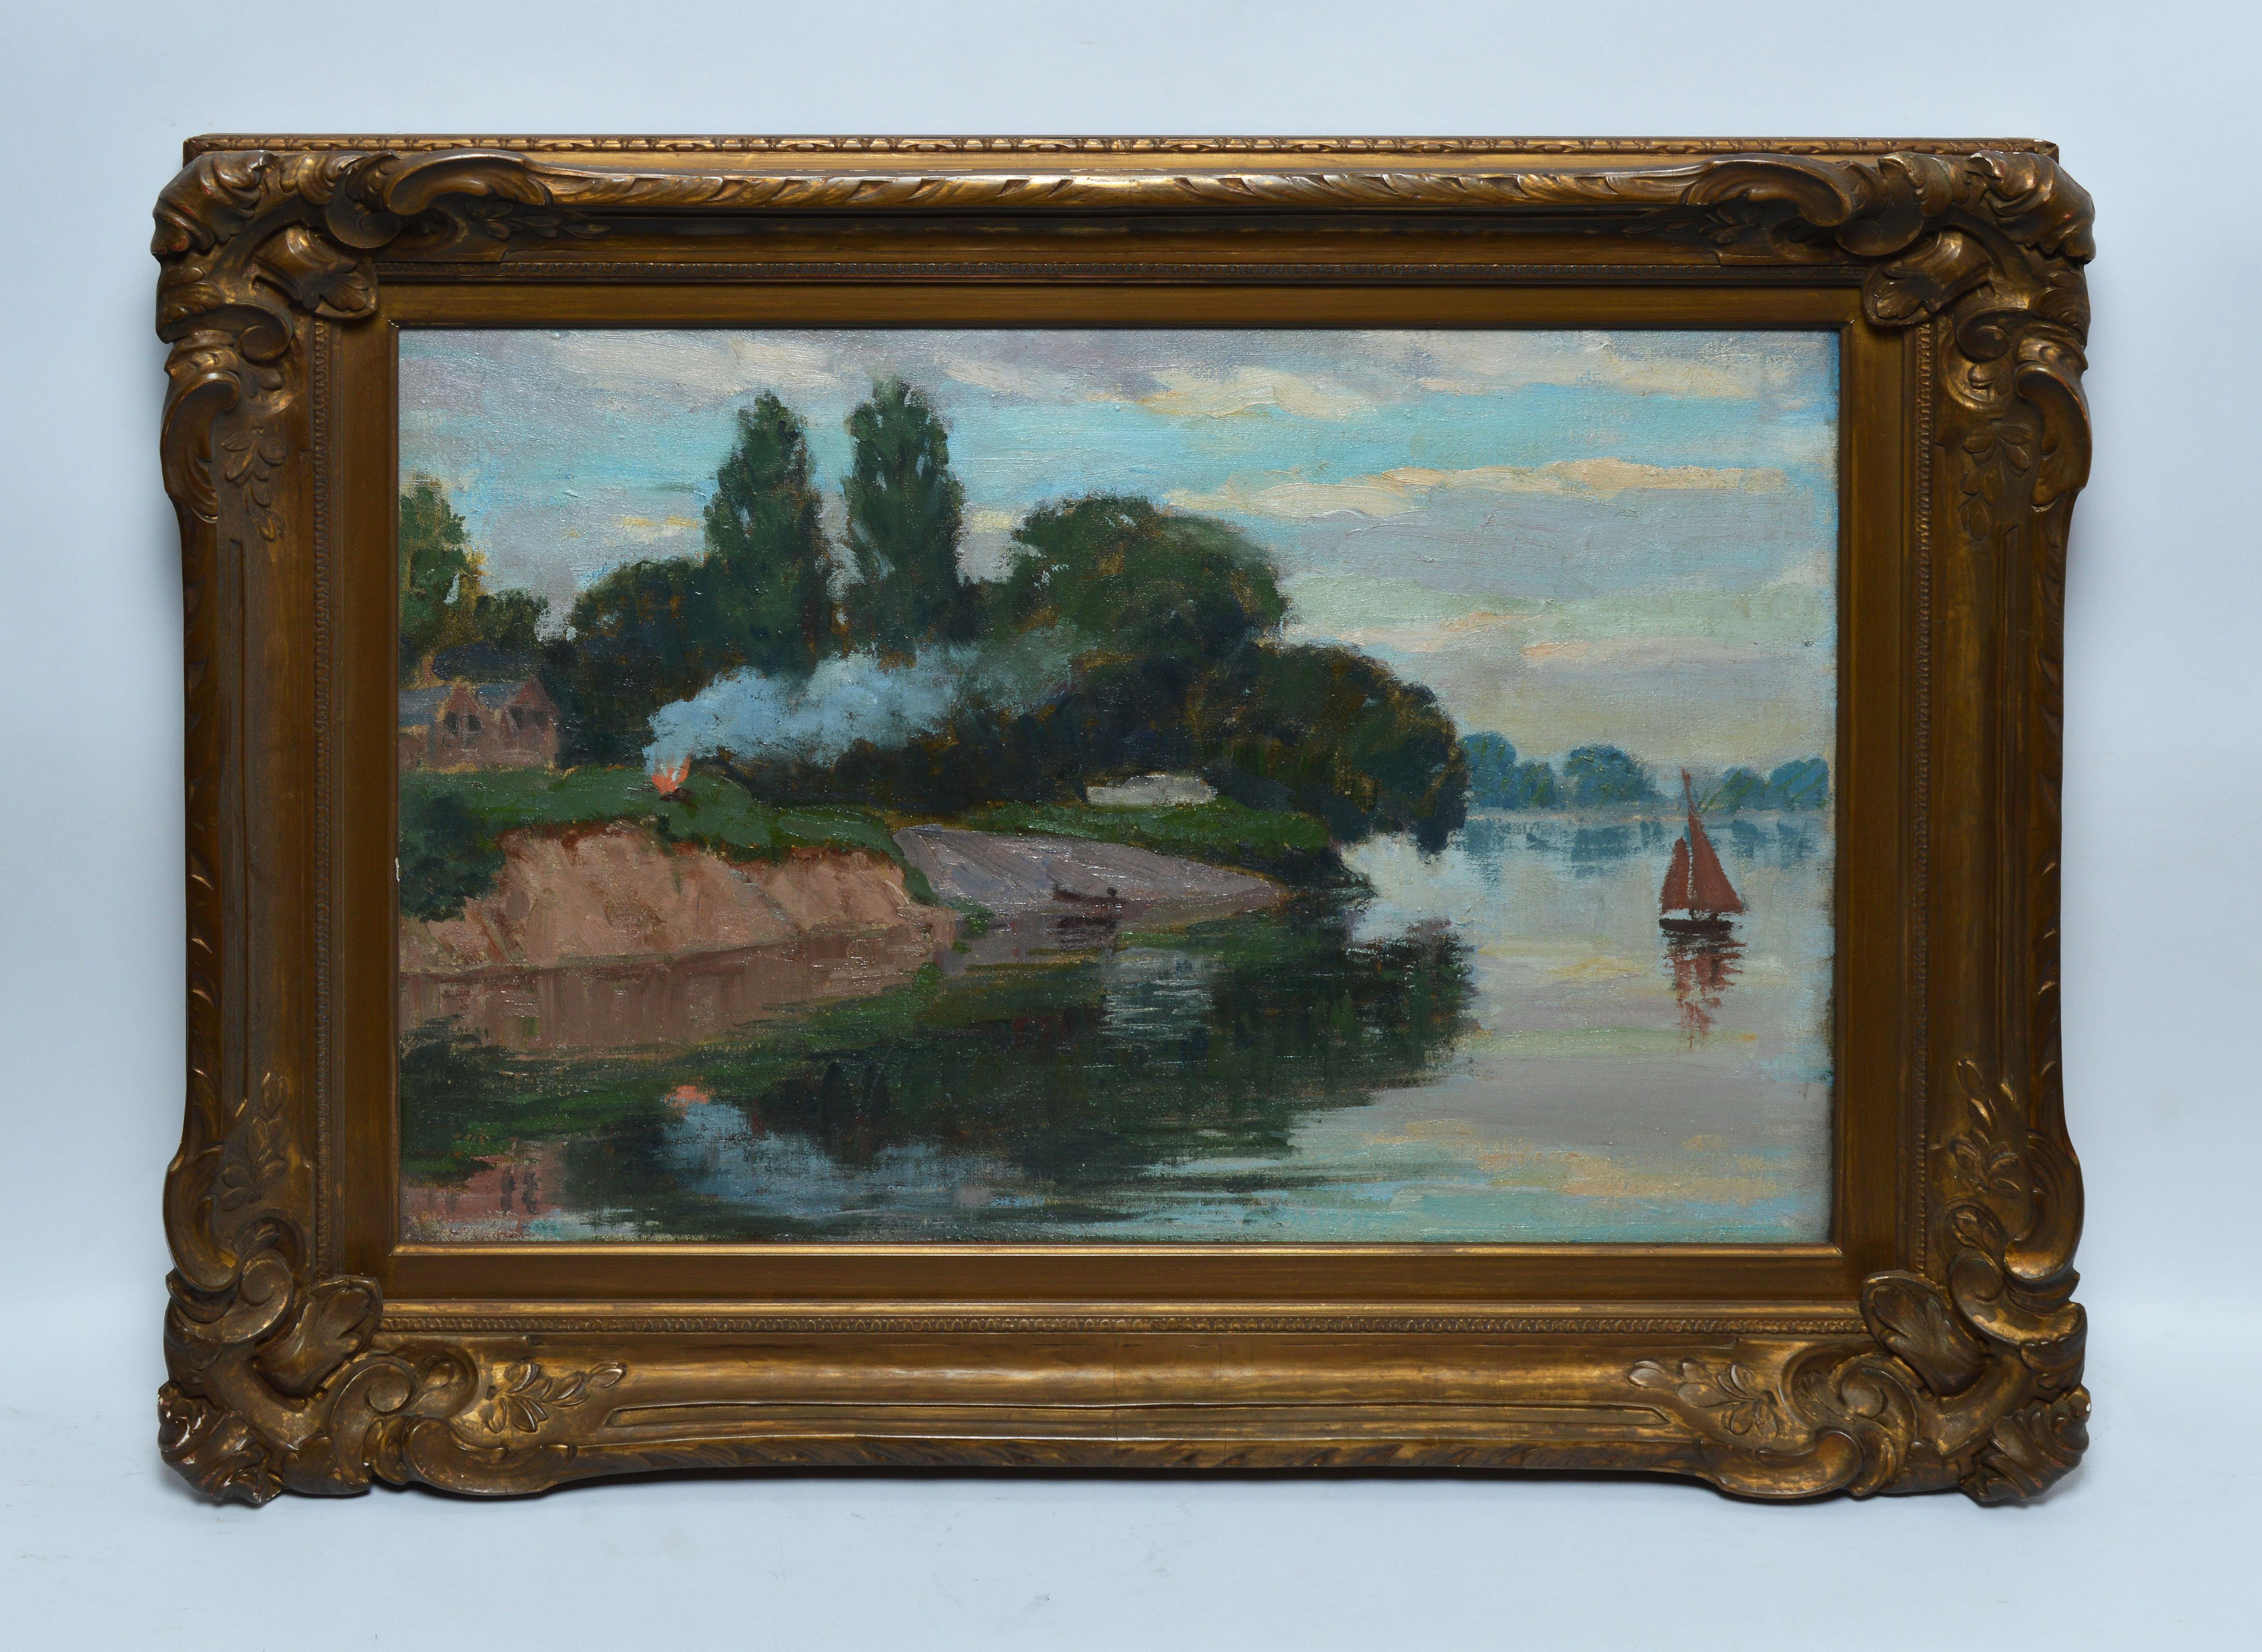 Antique American school impressionist painting.  Oil on canvas, circa 1920.  Unsigned.  Displayed in a period impressionist frame.  Image size, 22